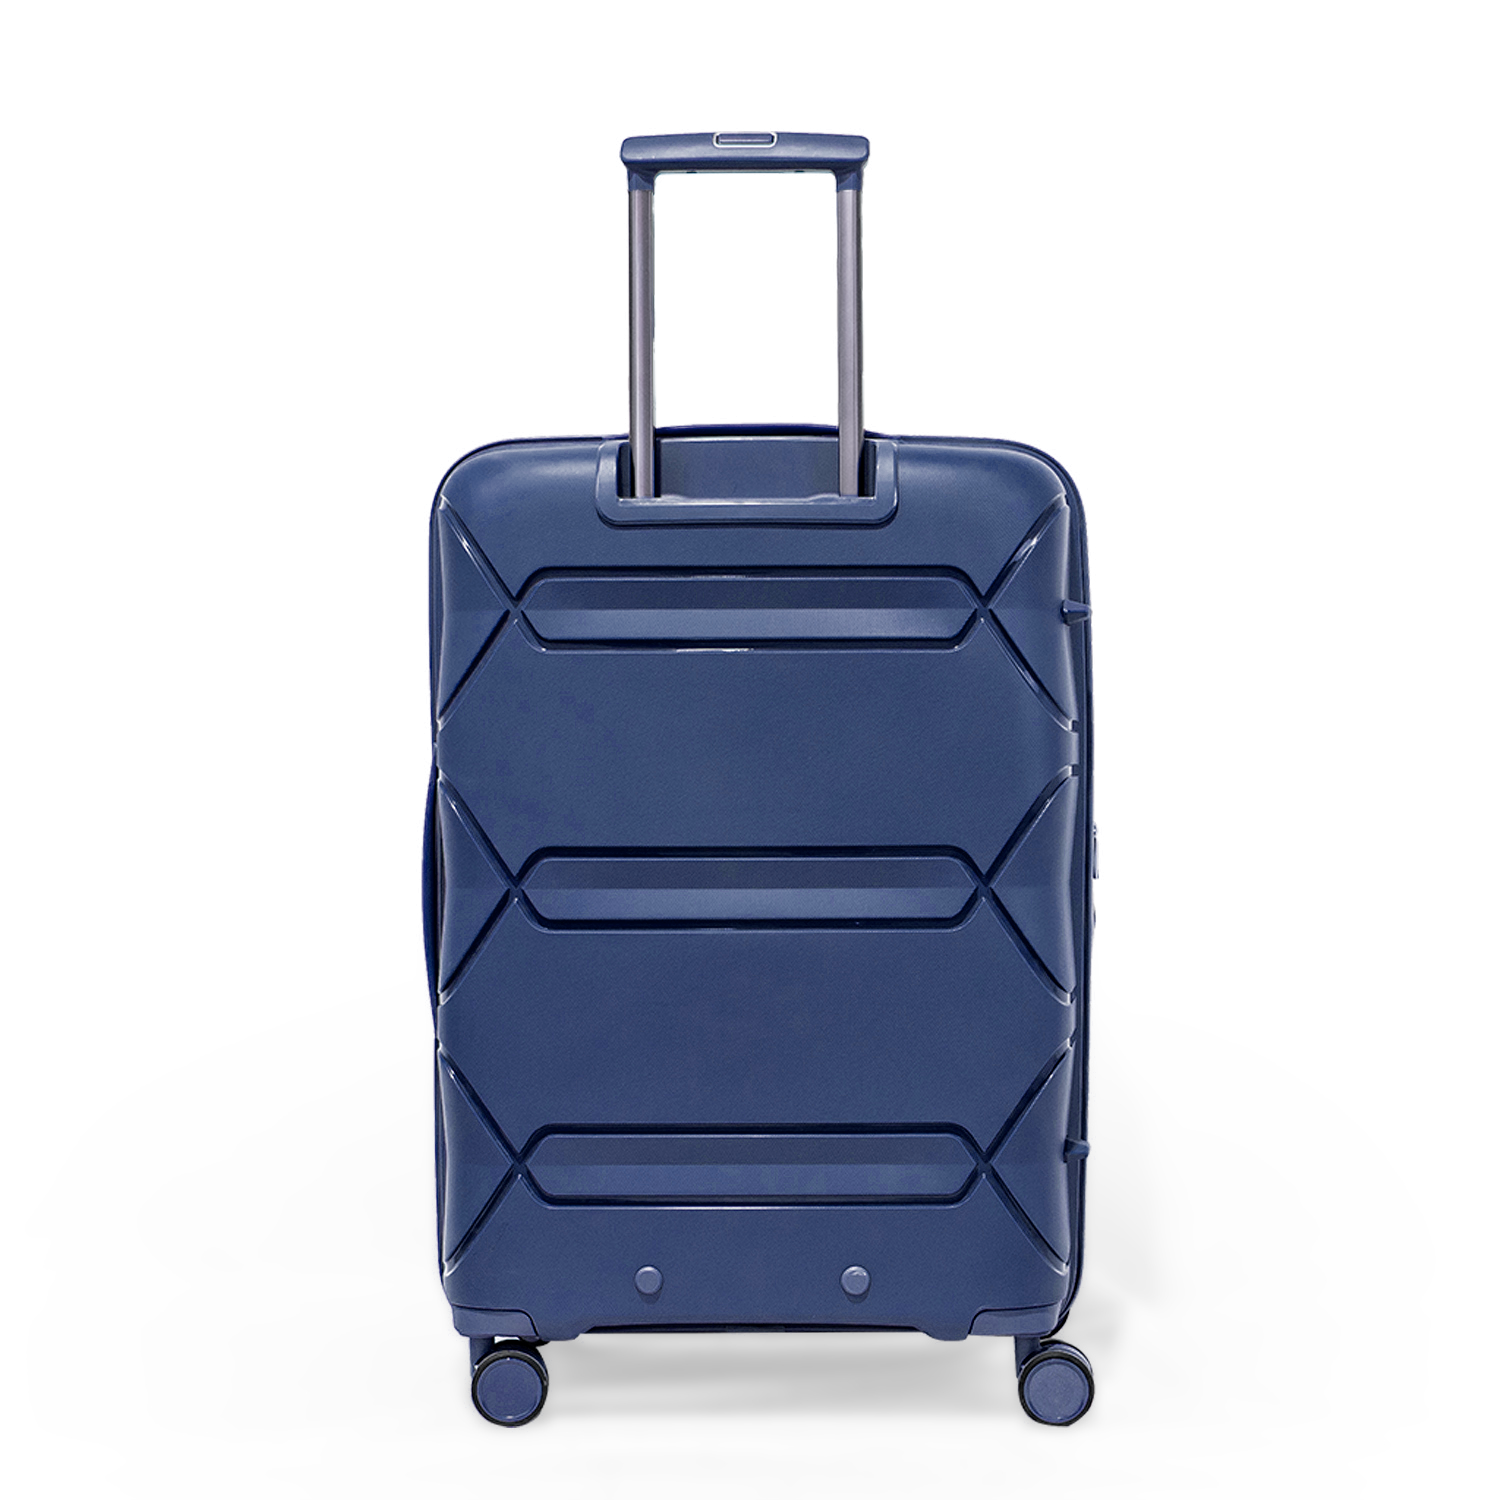 Pierre Cardin Trolley Strong Flexible Suitcases Set of 3 GreyBlue